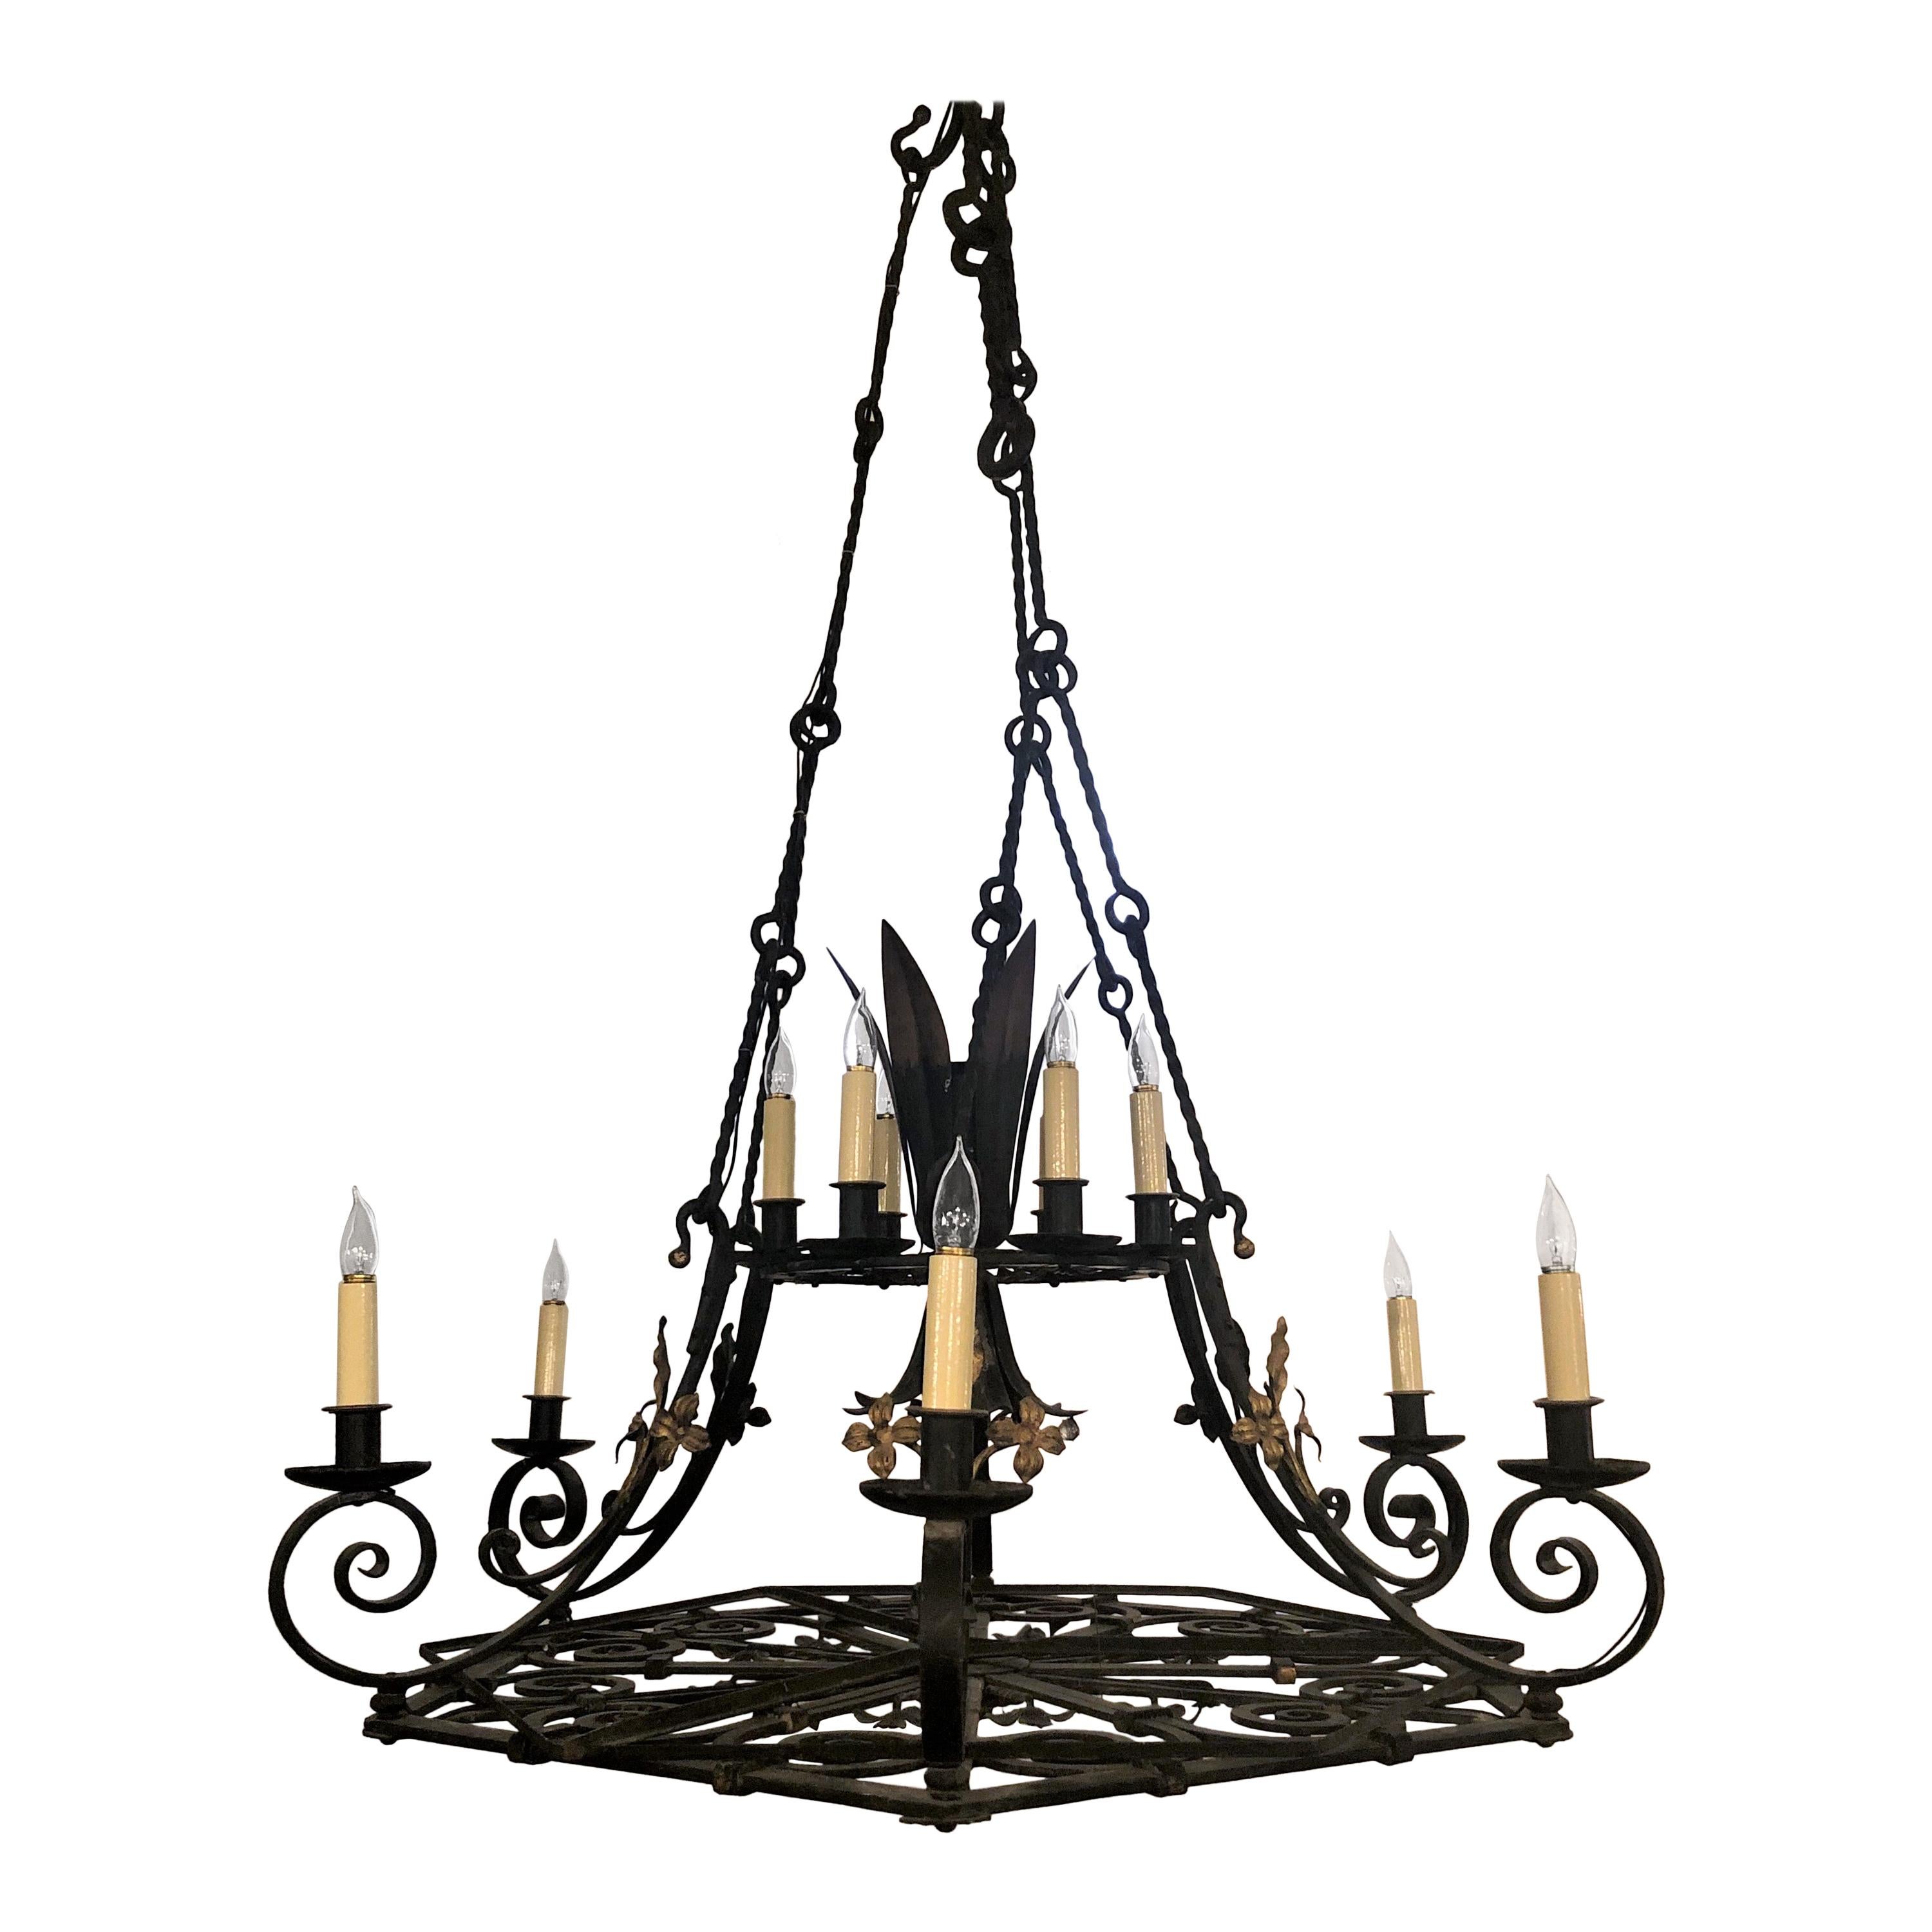 Grand Size Antique French Wrought Iron Chateau Chandelier, circa 1840